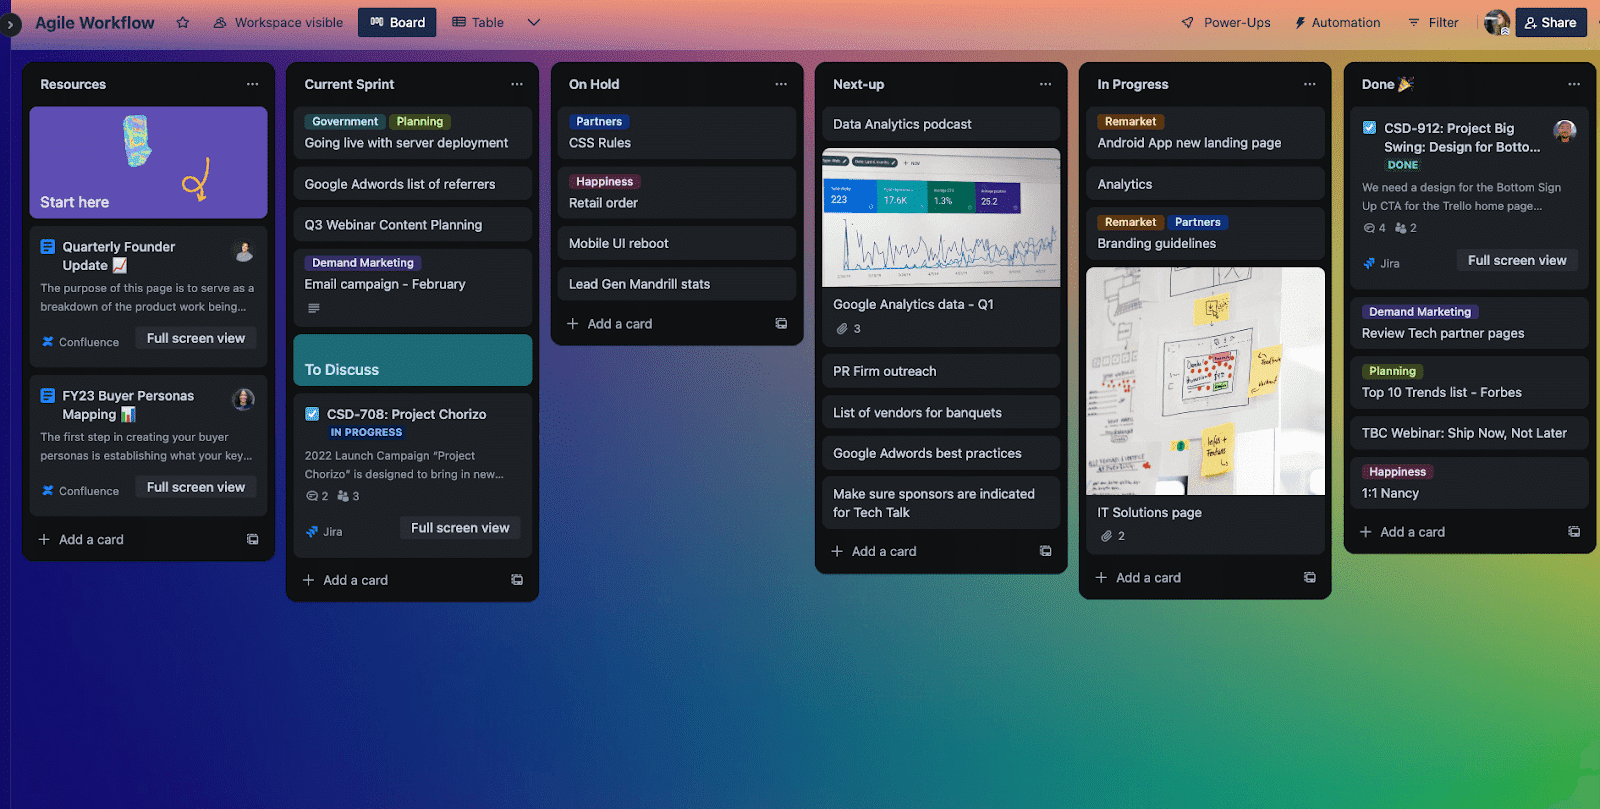 Trello can be for businesses that need simplicity and not too much complexity to use and plan

